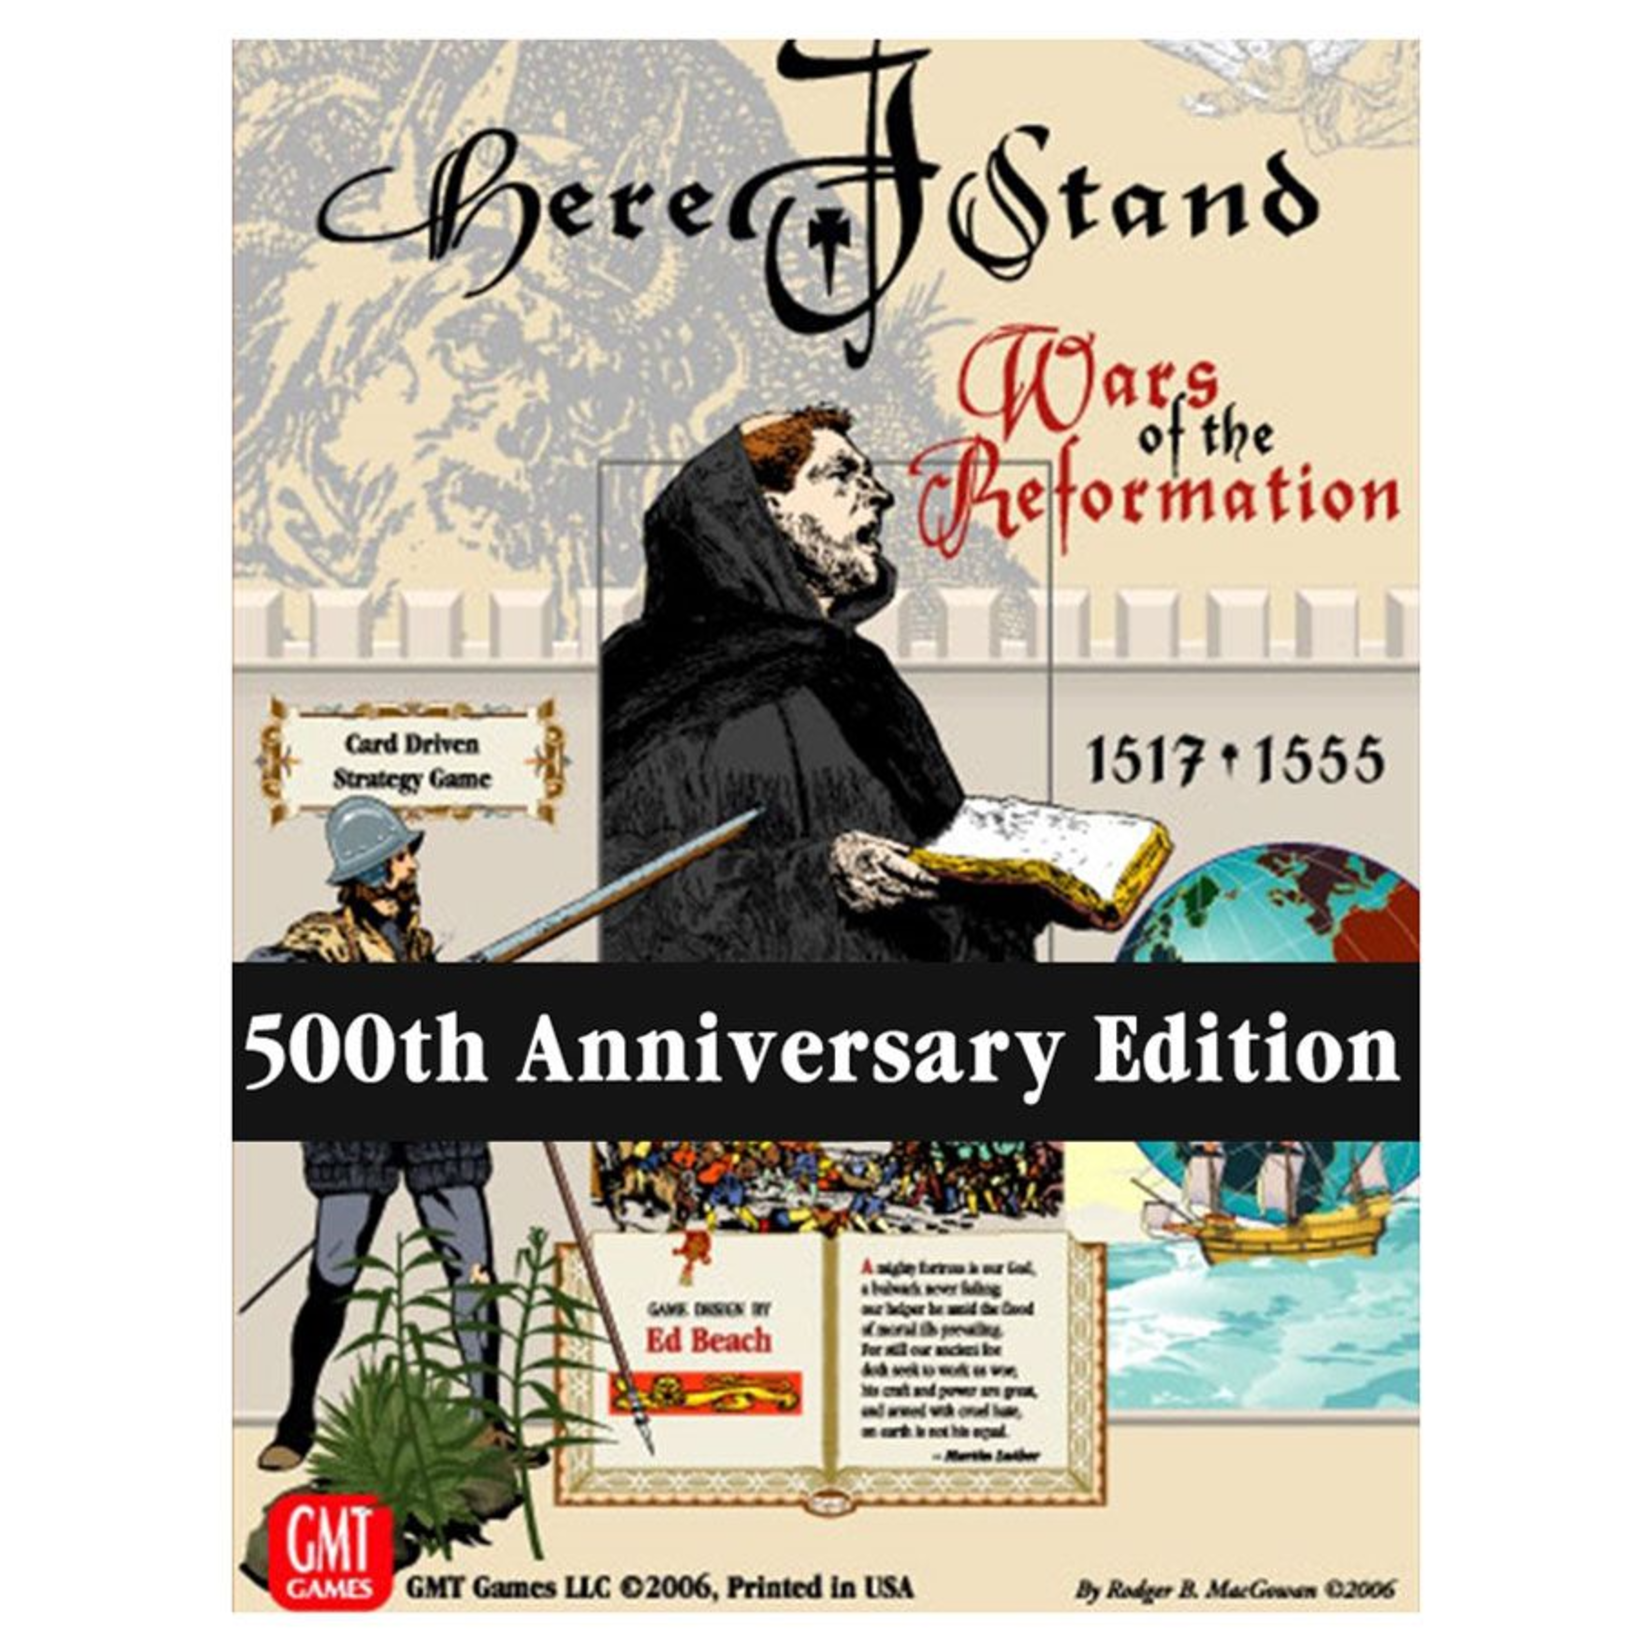 GMT Games Here I Stand Wars of the Reformation 500th Anniversary